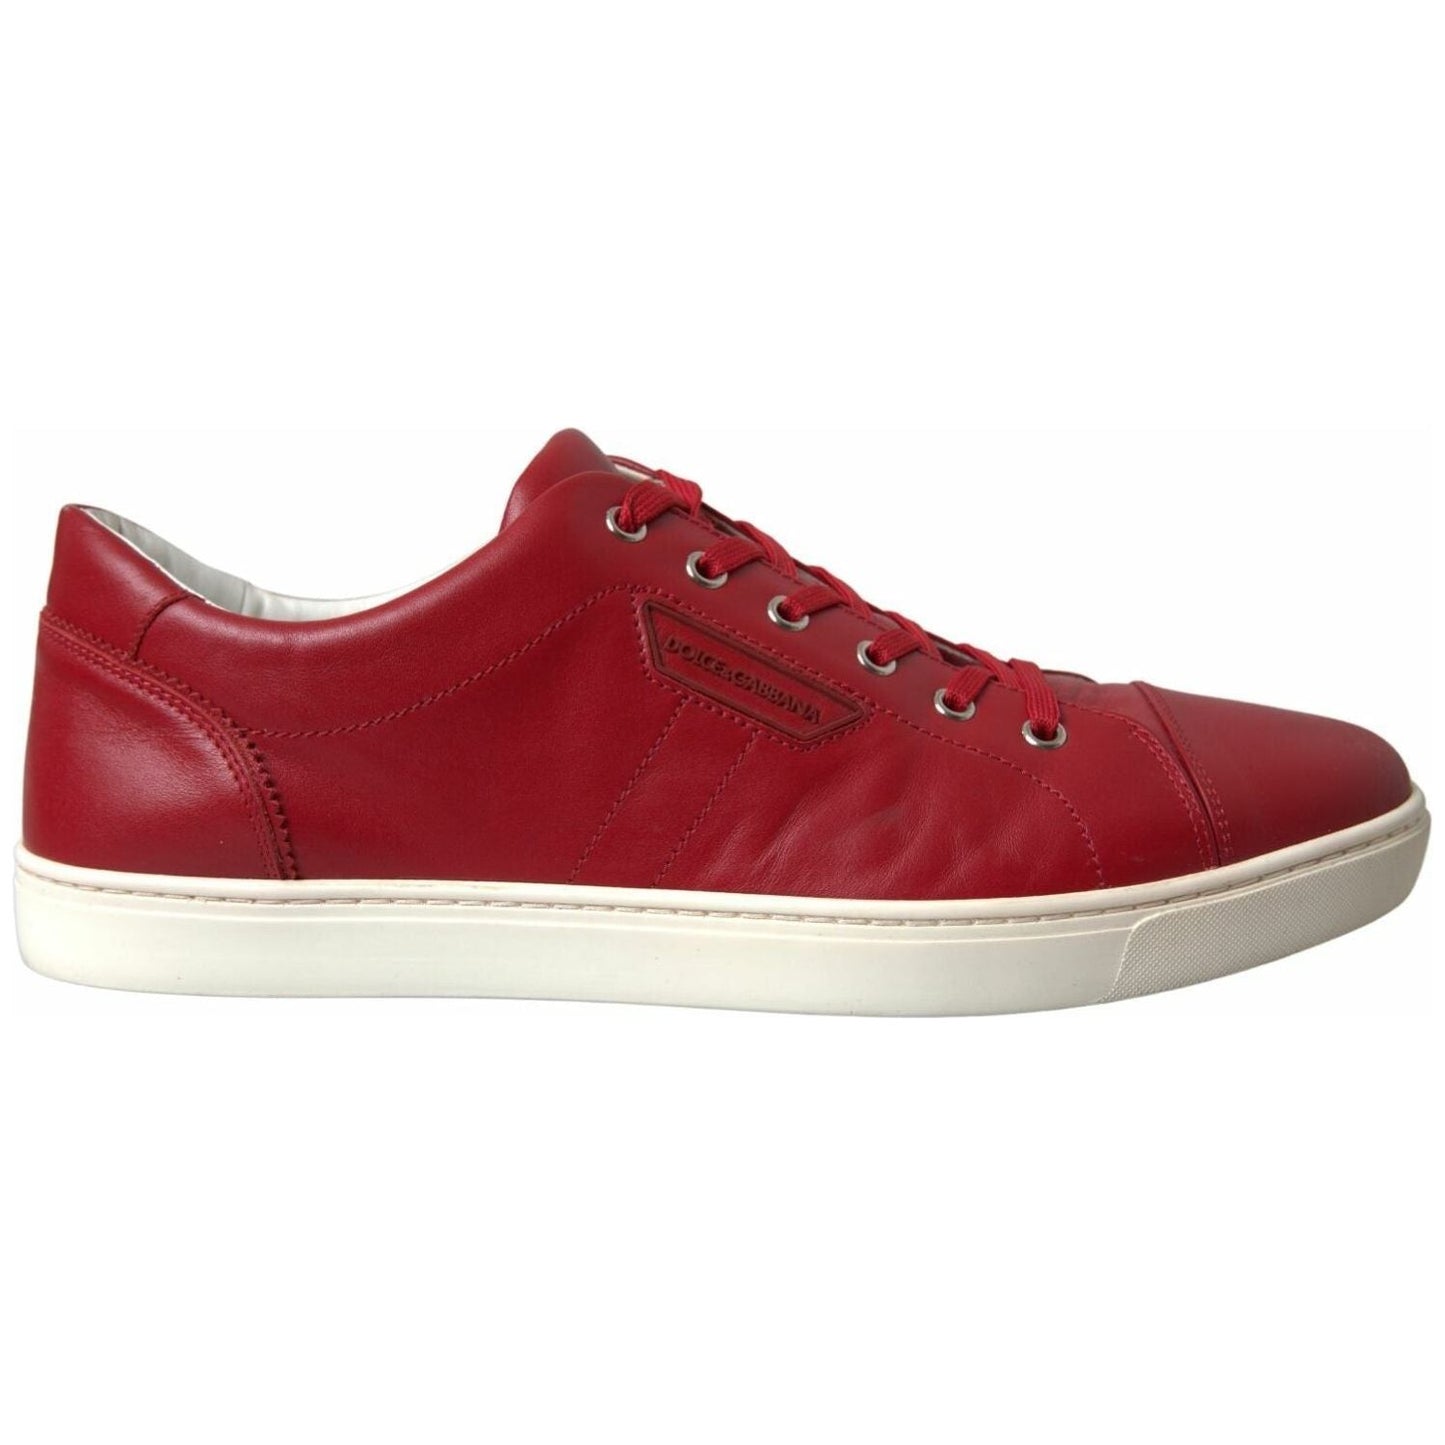 Dolce & Gabbana Elegant Red Leather Low Top Sneakers shoes-red-portofino-leather-low-top-mens-sneakers 1-scaled-831d83fa-d50.jpg